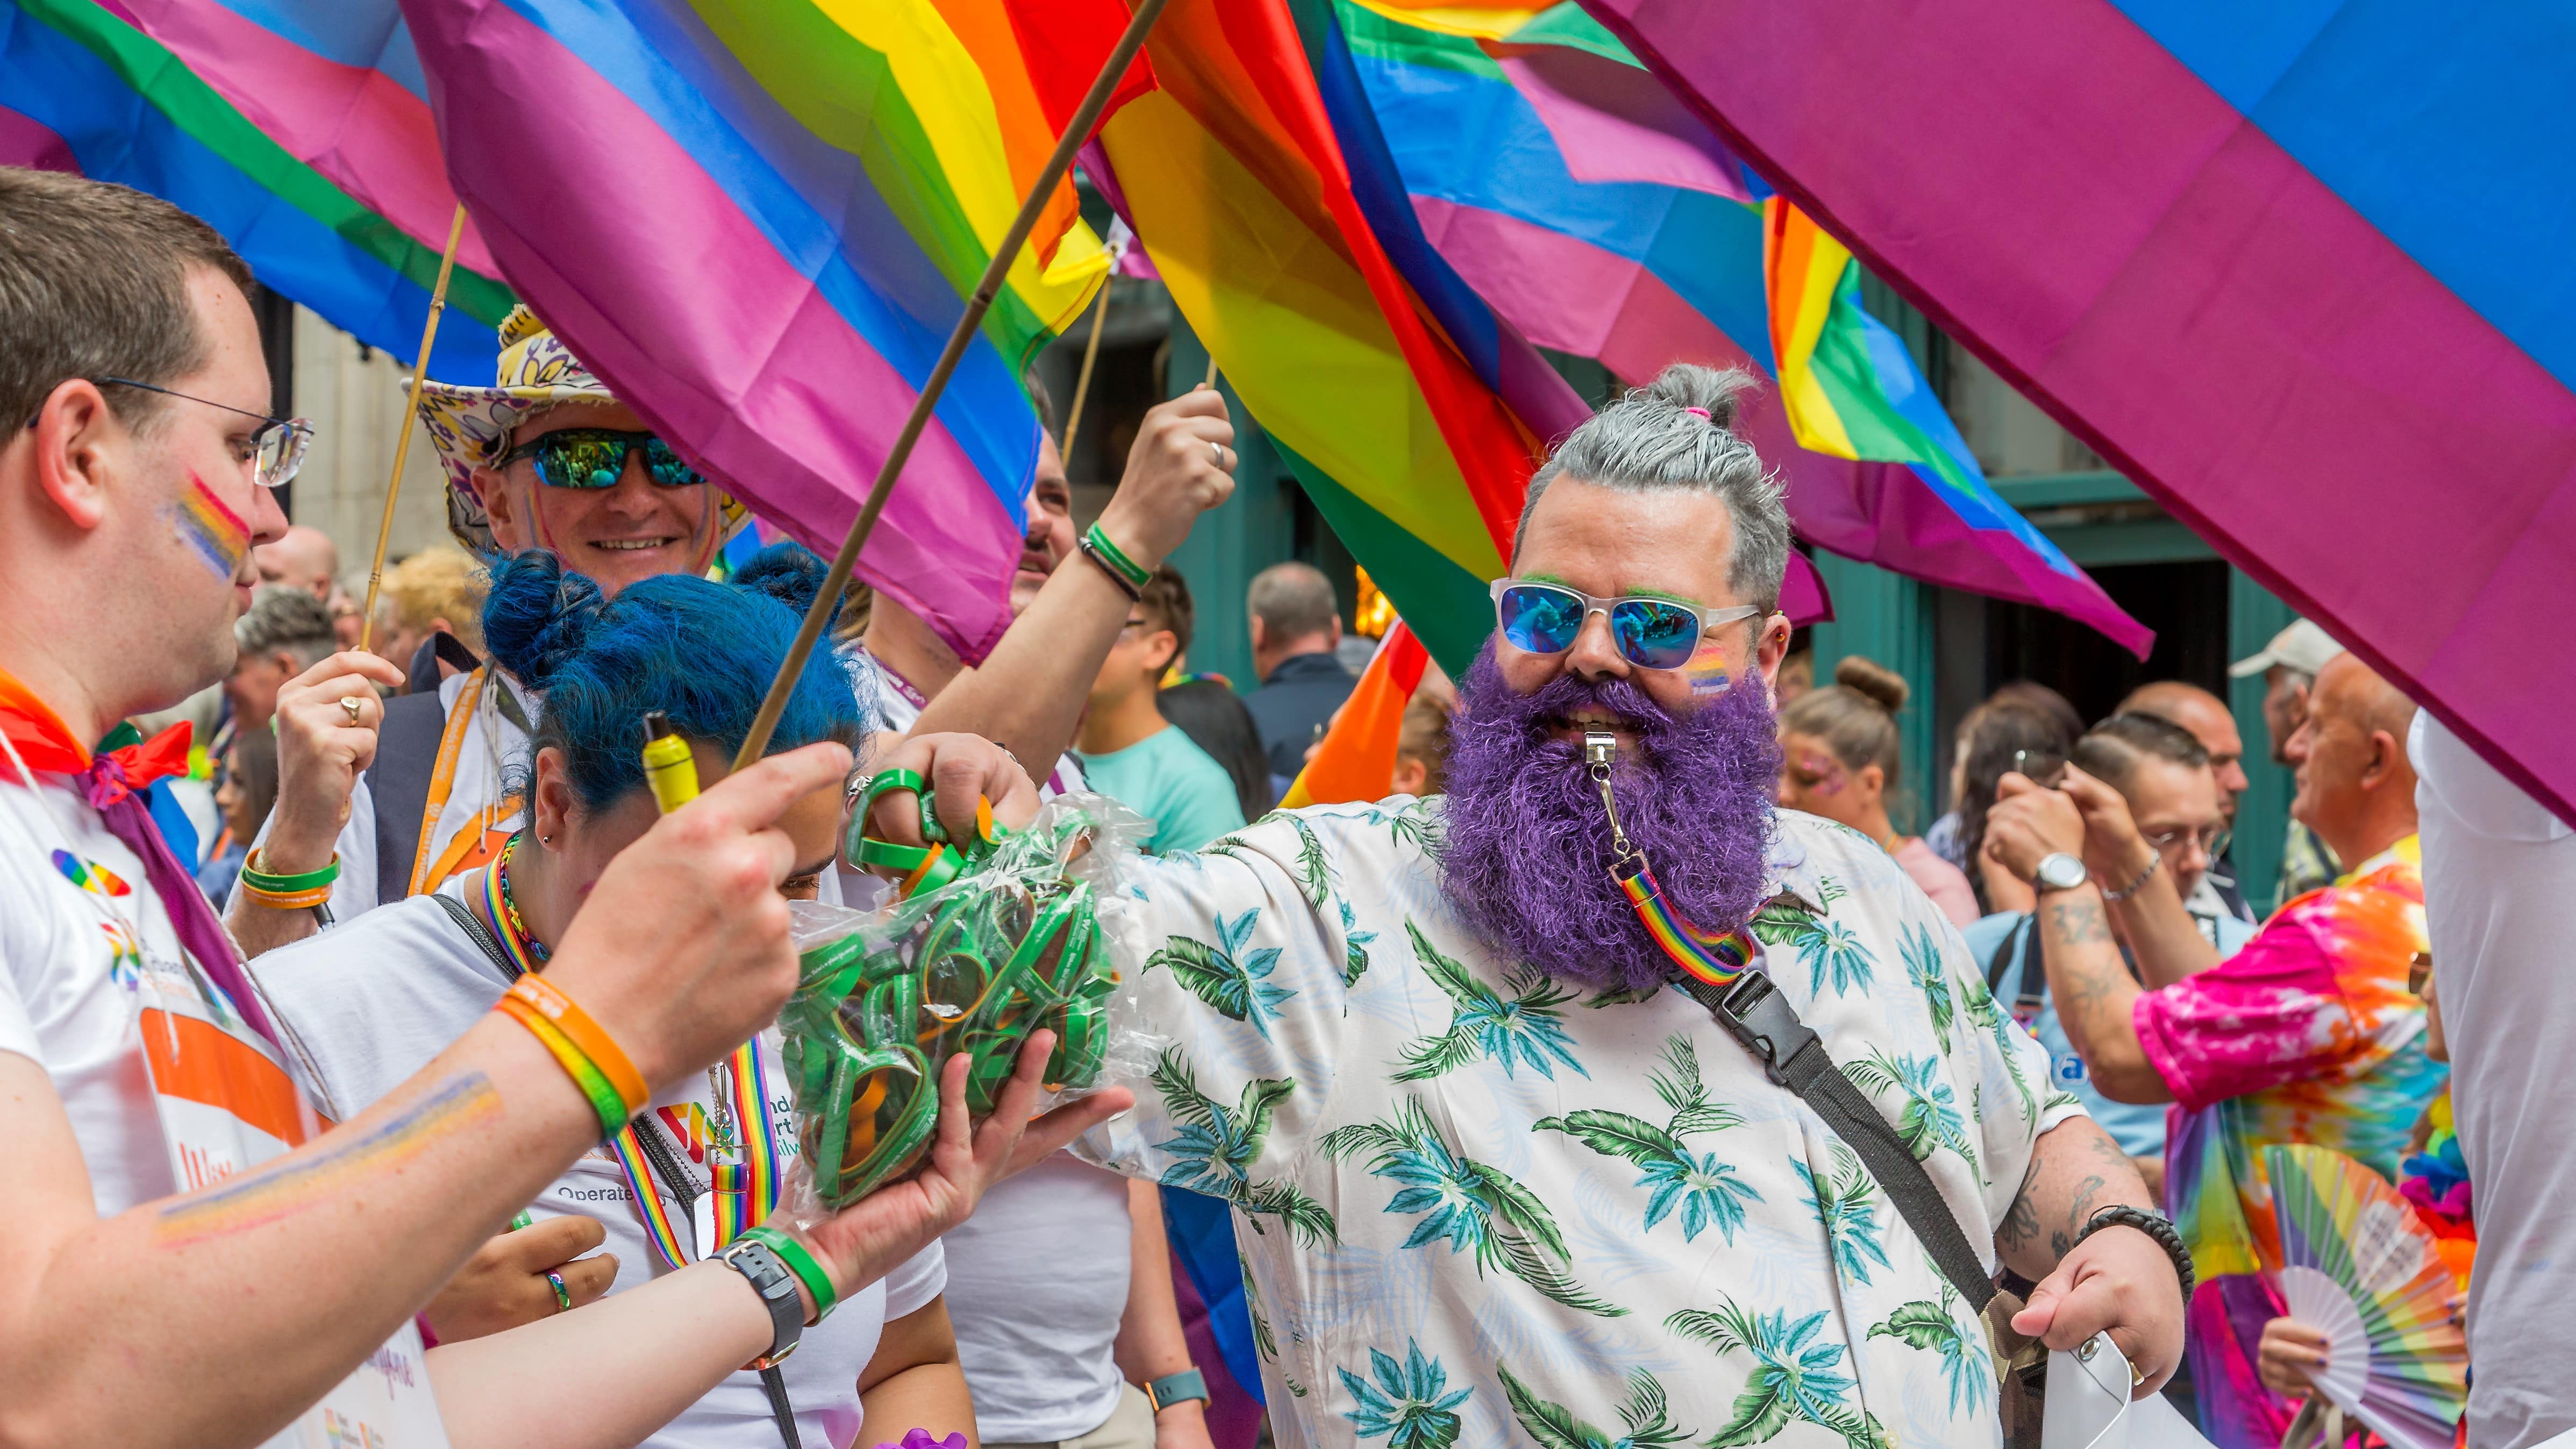 A reveller surrounded by flags and wearing a brightly coloured purple beard takes a handful of wristbands to hand out to the crowds along the Birmingham Pride 2023 parade route.